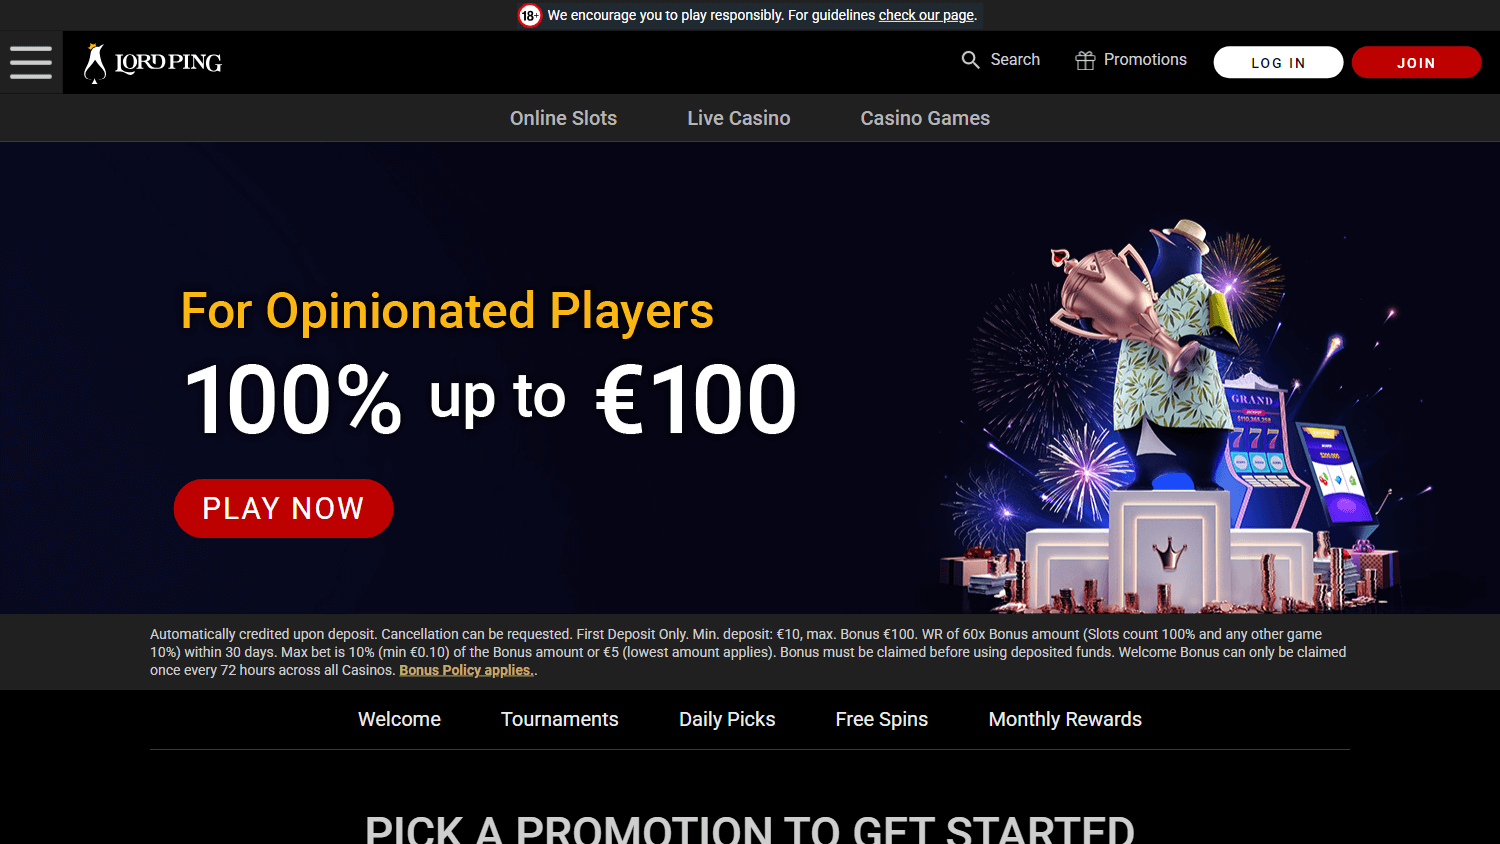 lord_ping_casino_promotions_desktop